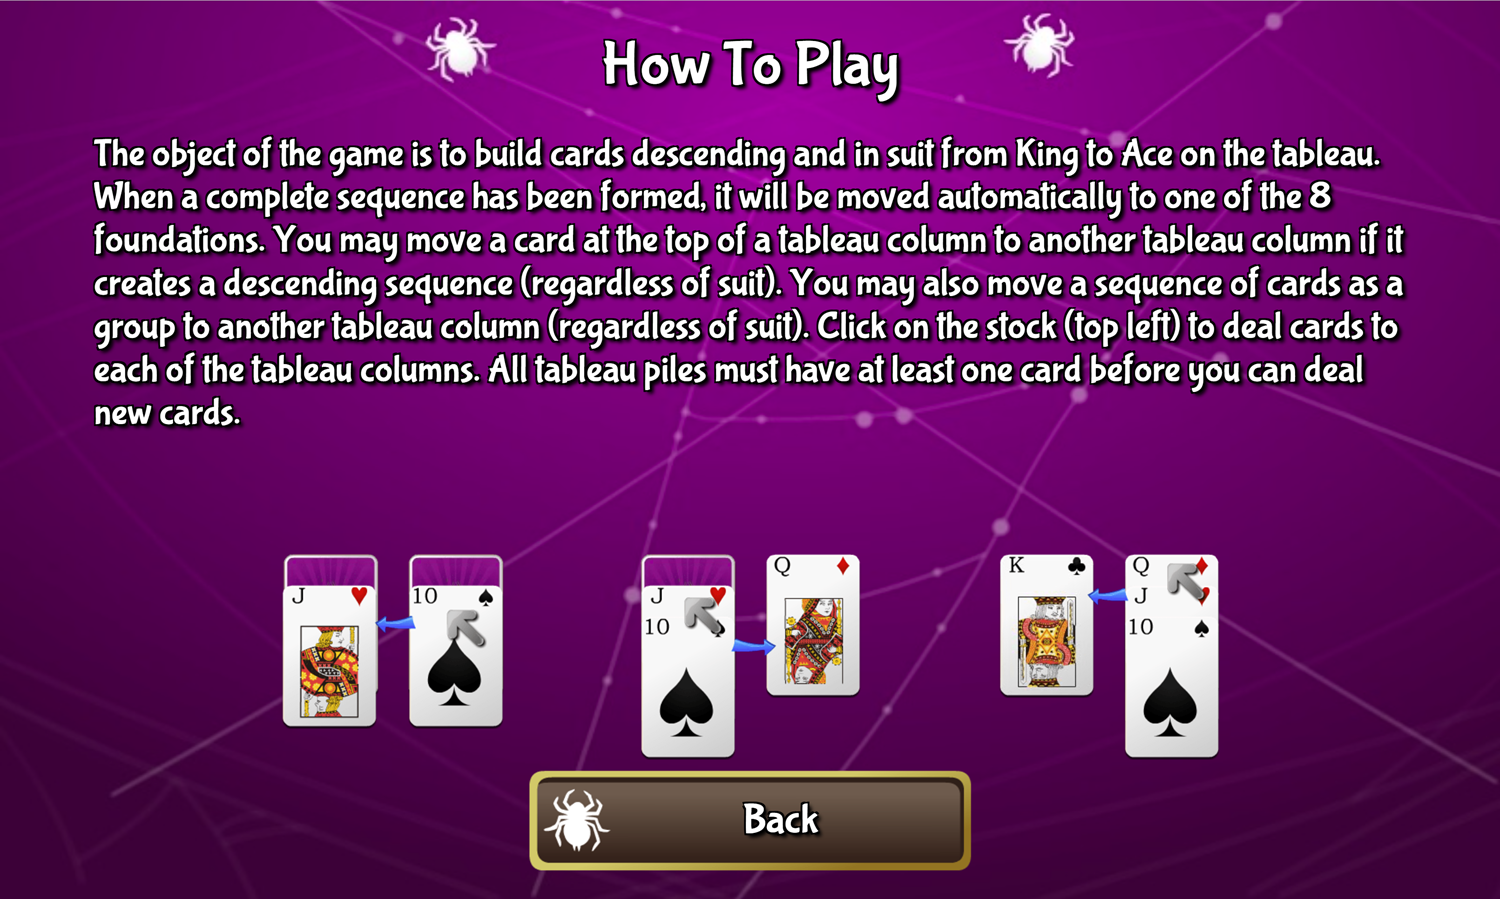 Black Widow Solitaire Game How to Play Instructions Screen Screenshot.